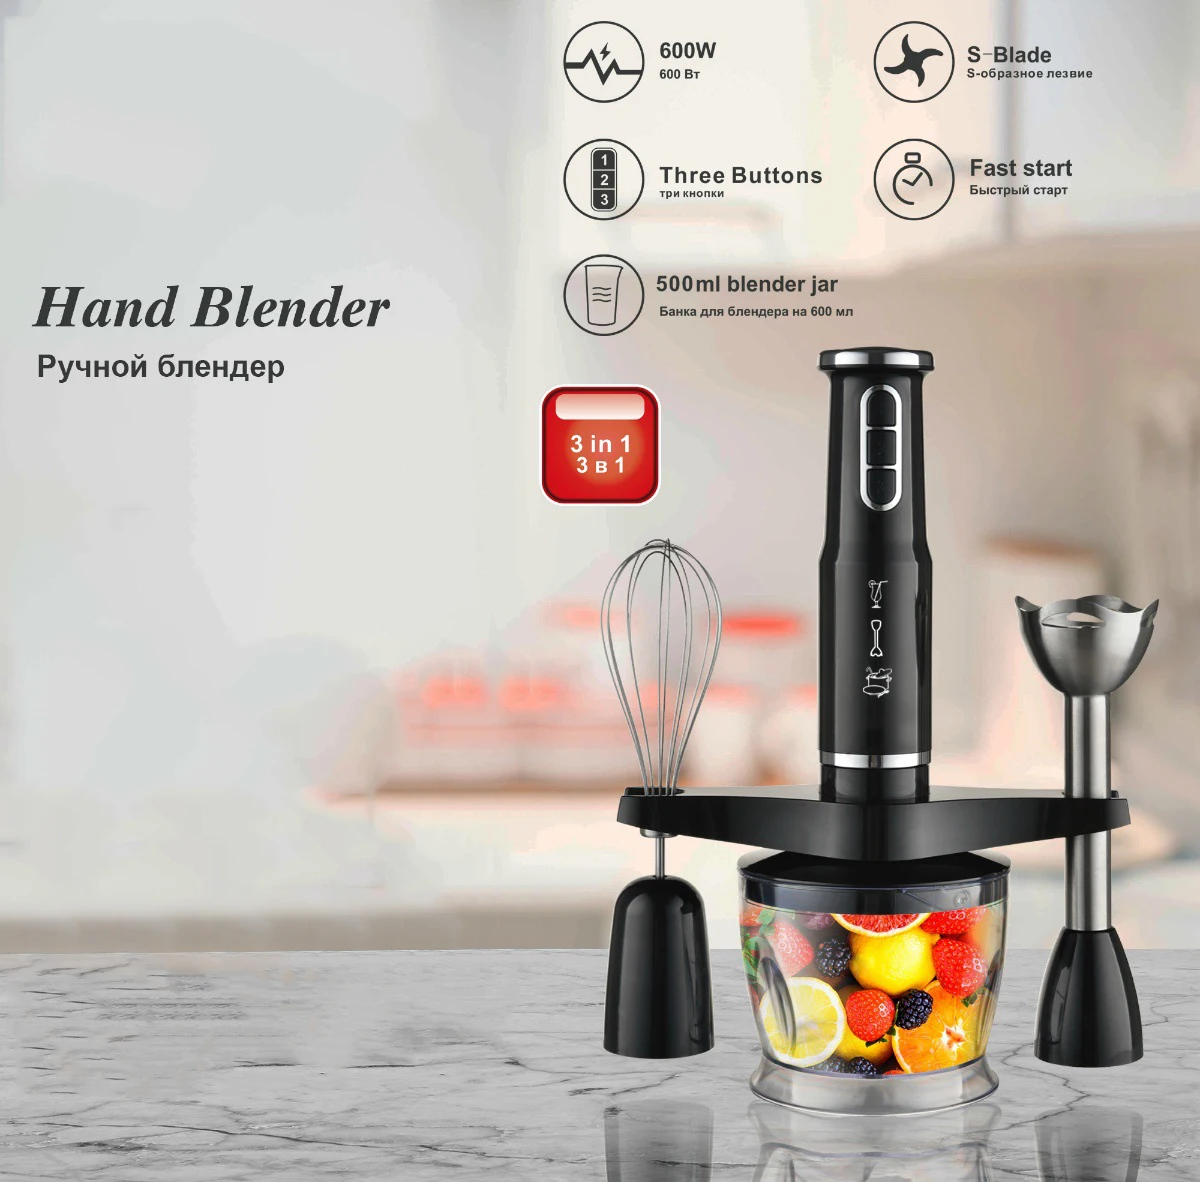 

4 in 1 High Power 600W Immersion Hand Stick Blender Mixer with Chopper and Smoothie Cup Stainless Steel Ice Blades for kitchen